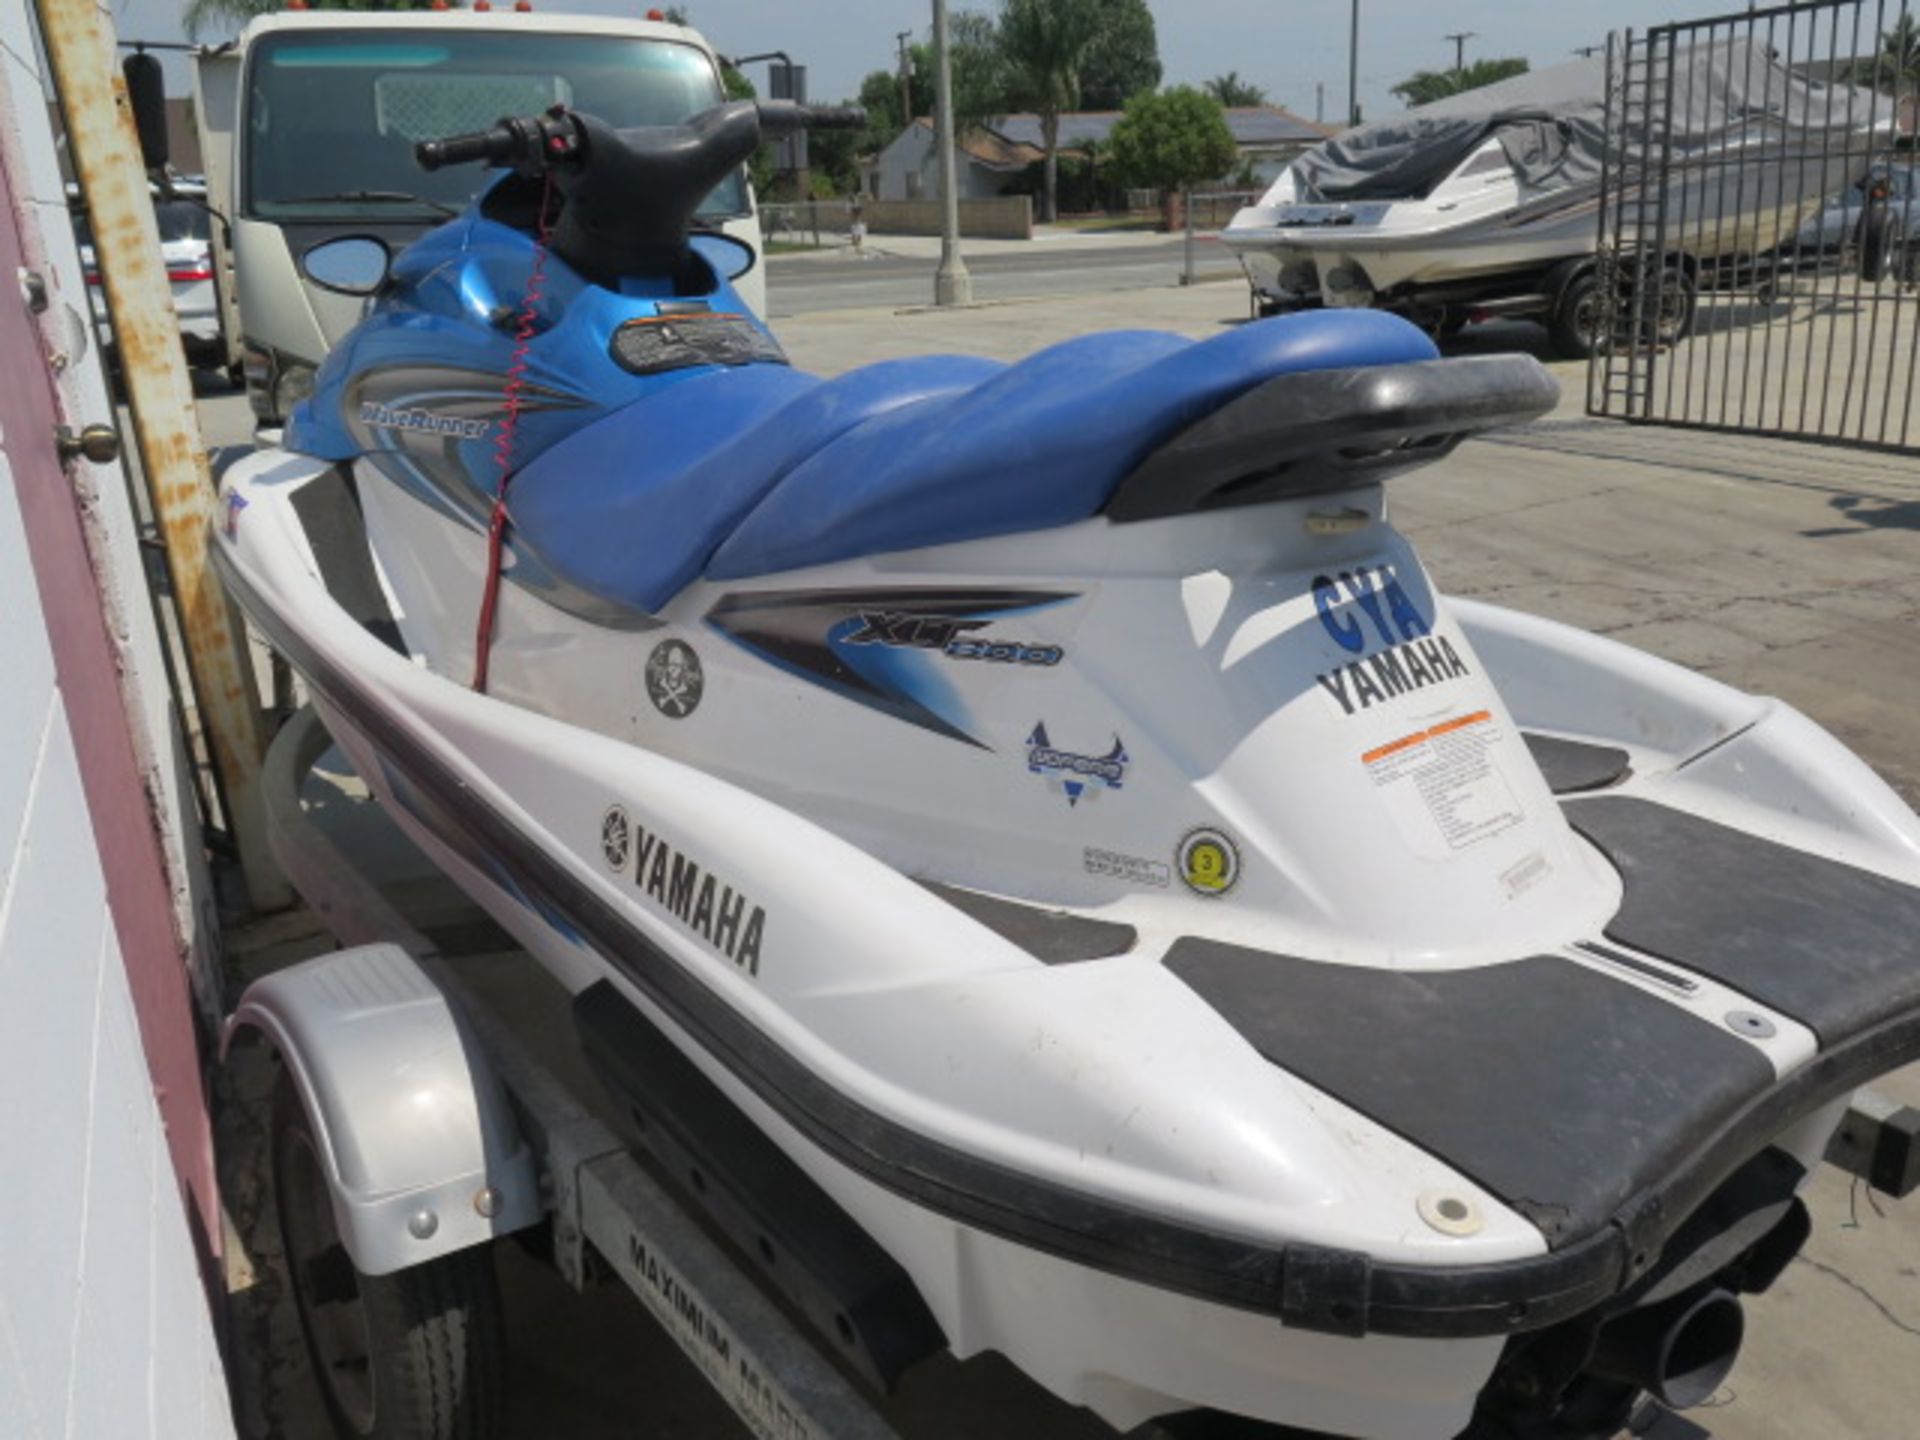 2004 Yamaha XLT800 Wave Runner Personal Watercraft w/ Gas Engine, Jet Outdrive, Trailer, SOLD AS IS - Image 7 of 15